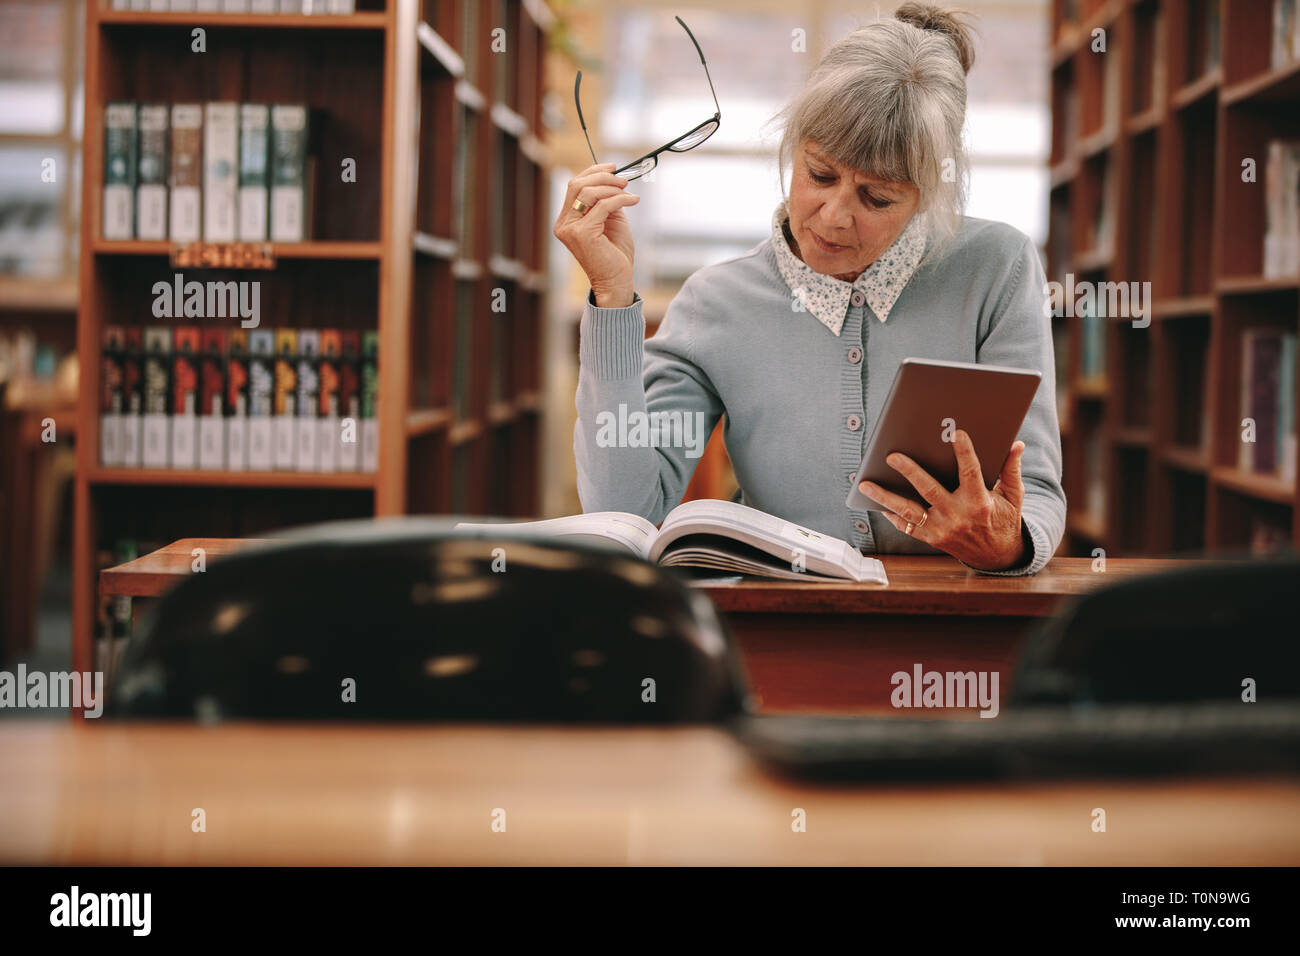 Senior woman using a tablet pc for reference while reading a book in library. Woman sitting in a library reading a book. Stock Photo